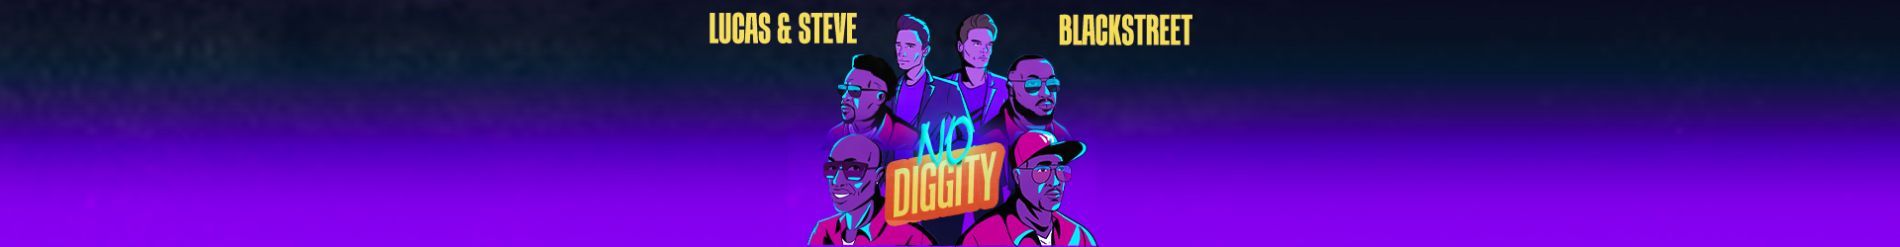 SAVE 'NO DIGGITY' TO YOUR FAVORITES TO WIN LG EARBUDS AND A 'LETTERS TO REMEMBER' VINYL!